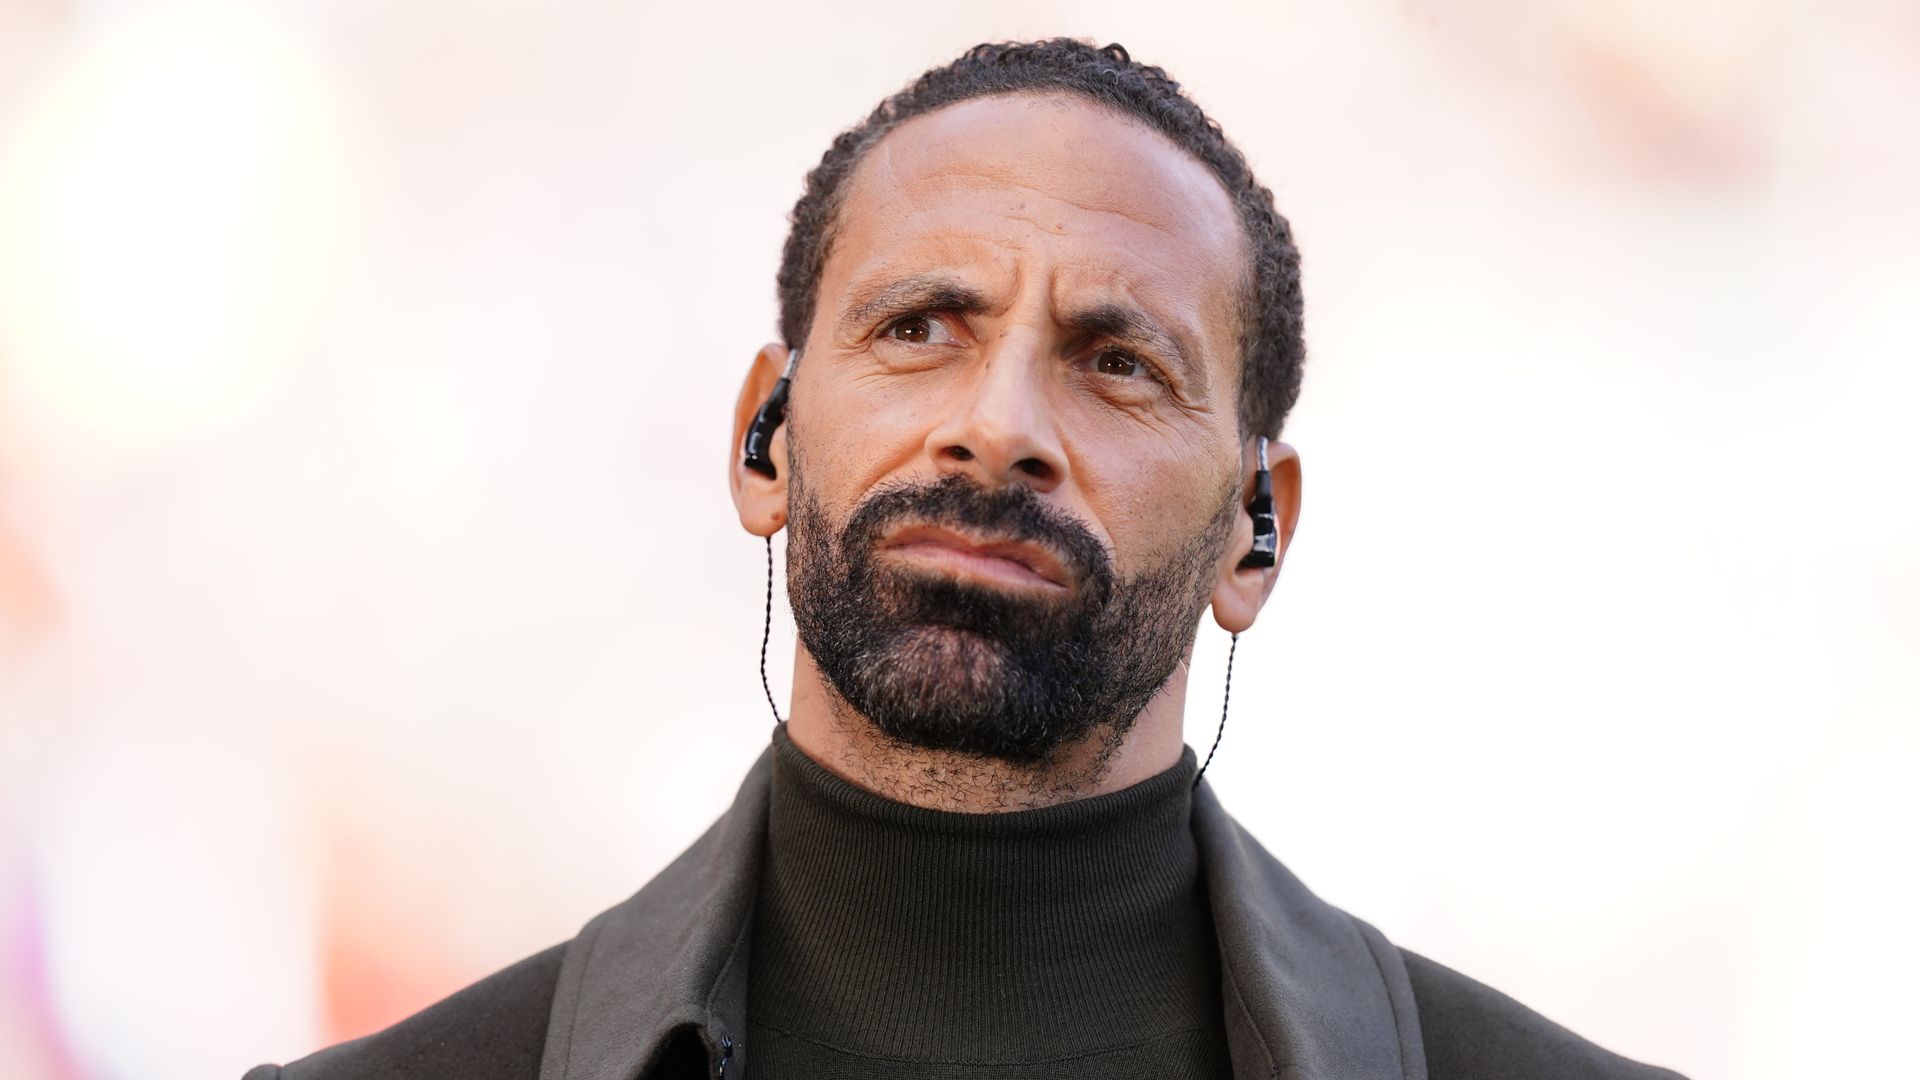 Wolves fan found guilty of racially abusing Rio Ferdinand